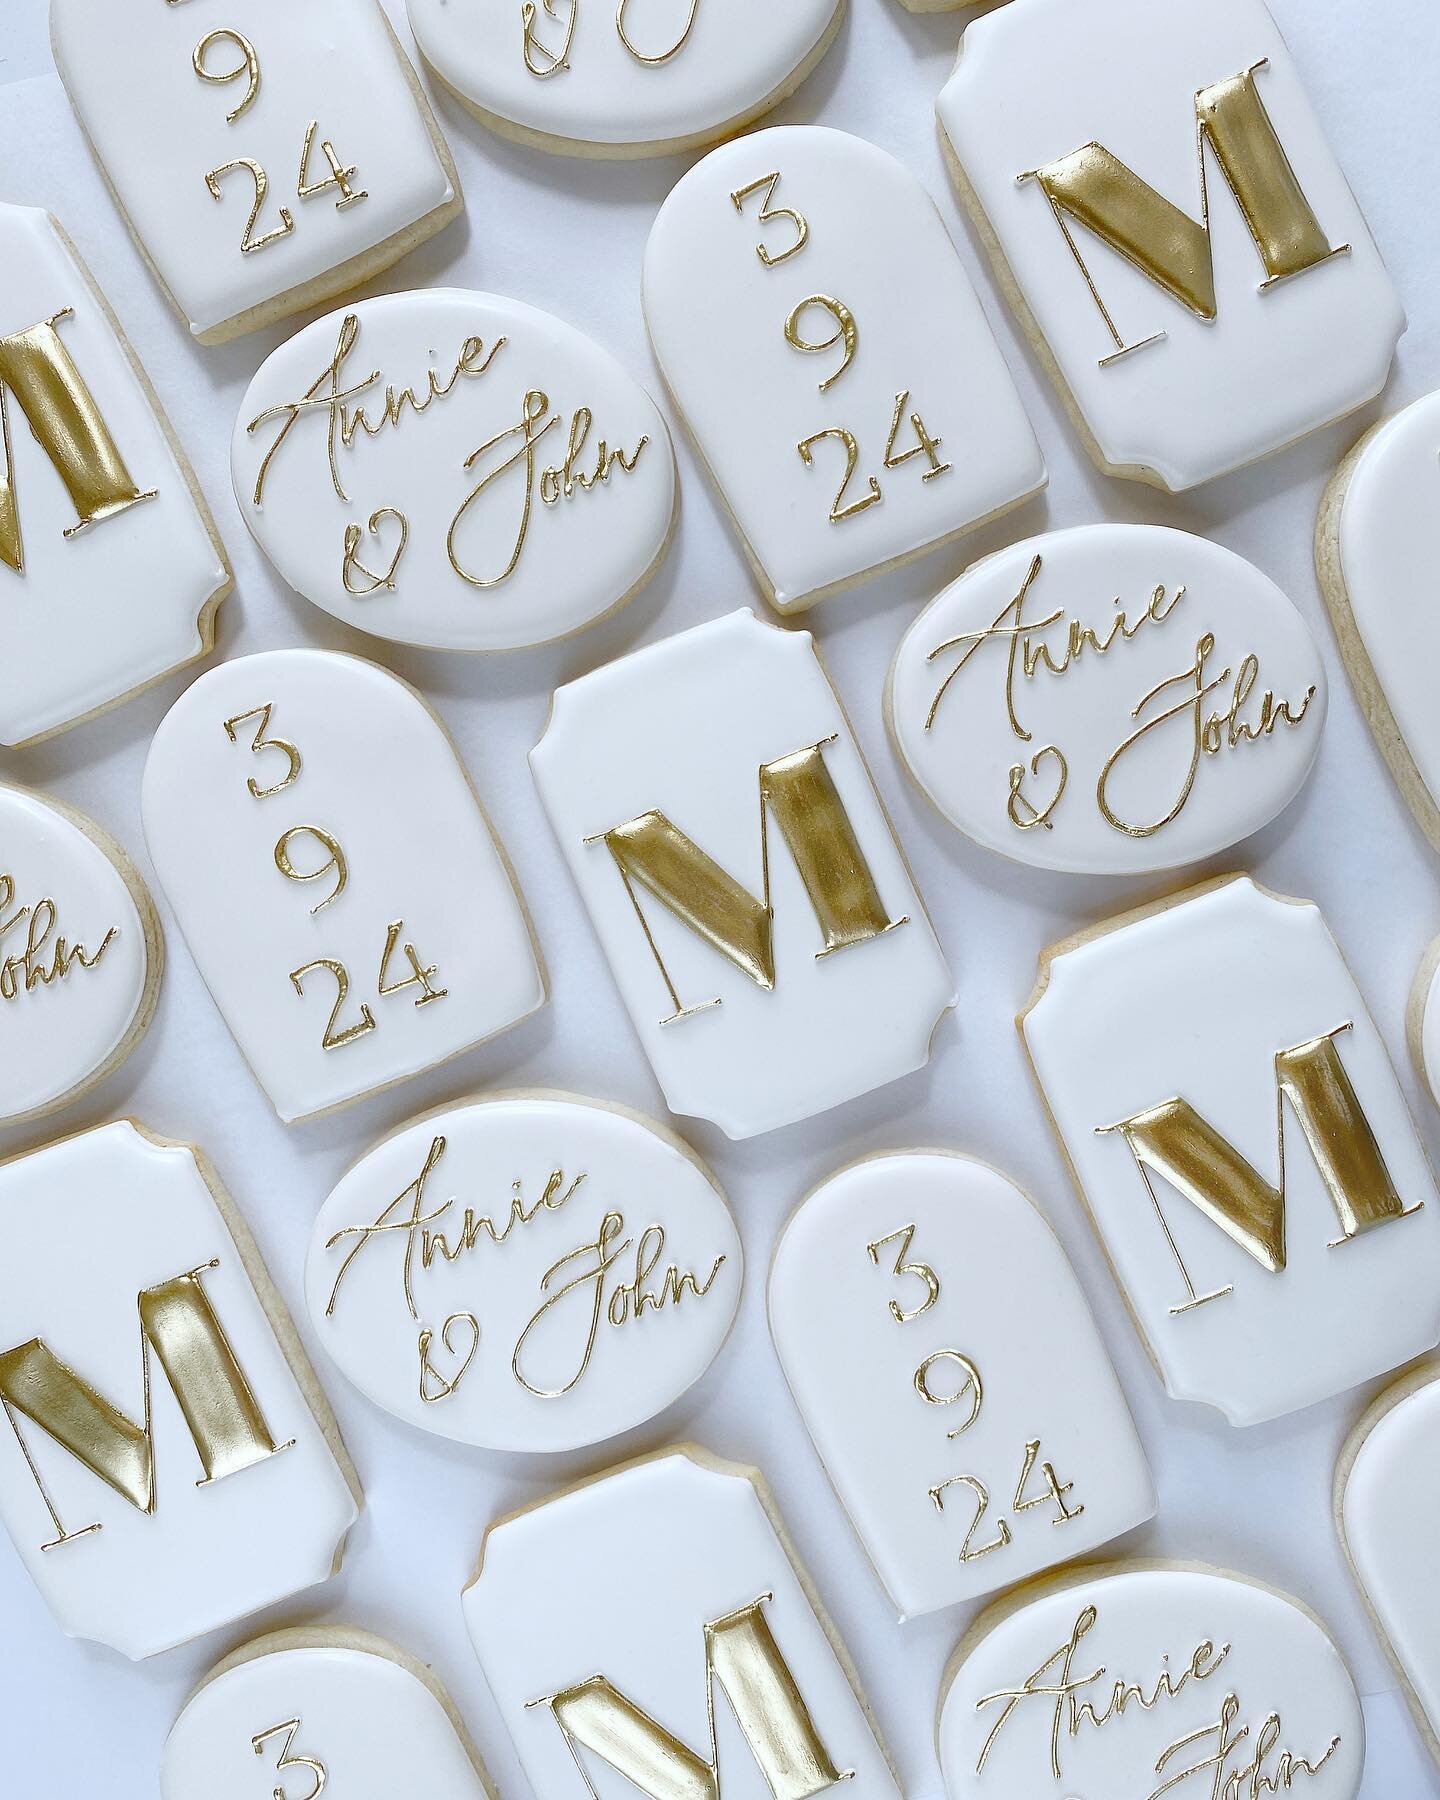 When your wedding feel is classic &amp; clean, with a few modern touches this is what your cookies look like 😍. Mixing fonts and shapes while keeping the color palette consistent across all the designs is always a win. 

Congratulations Mr. &amp; Mr